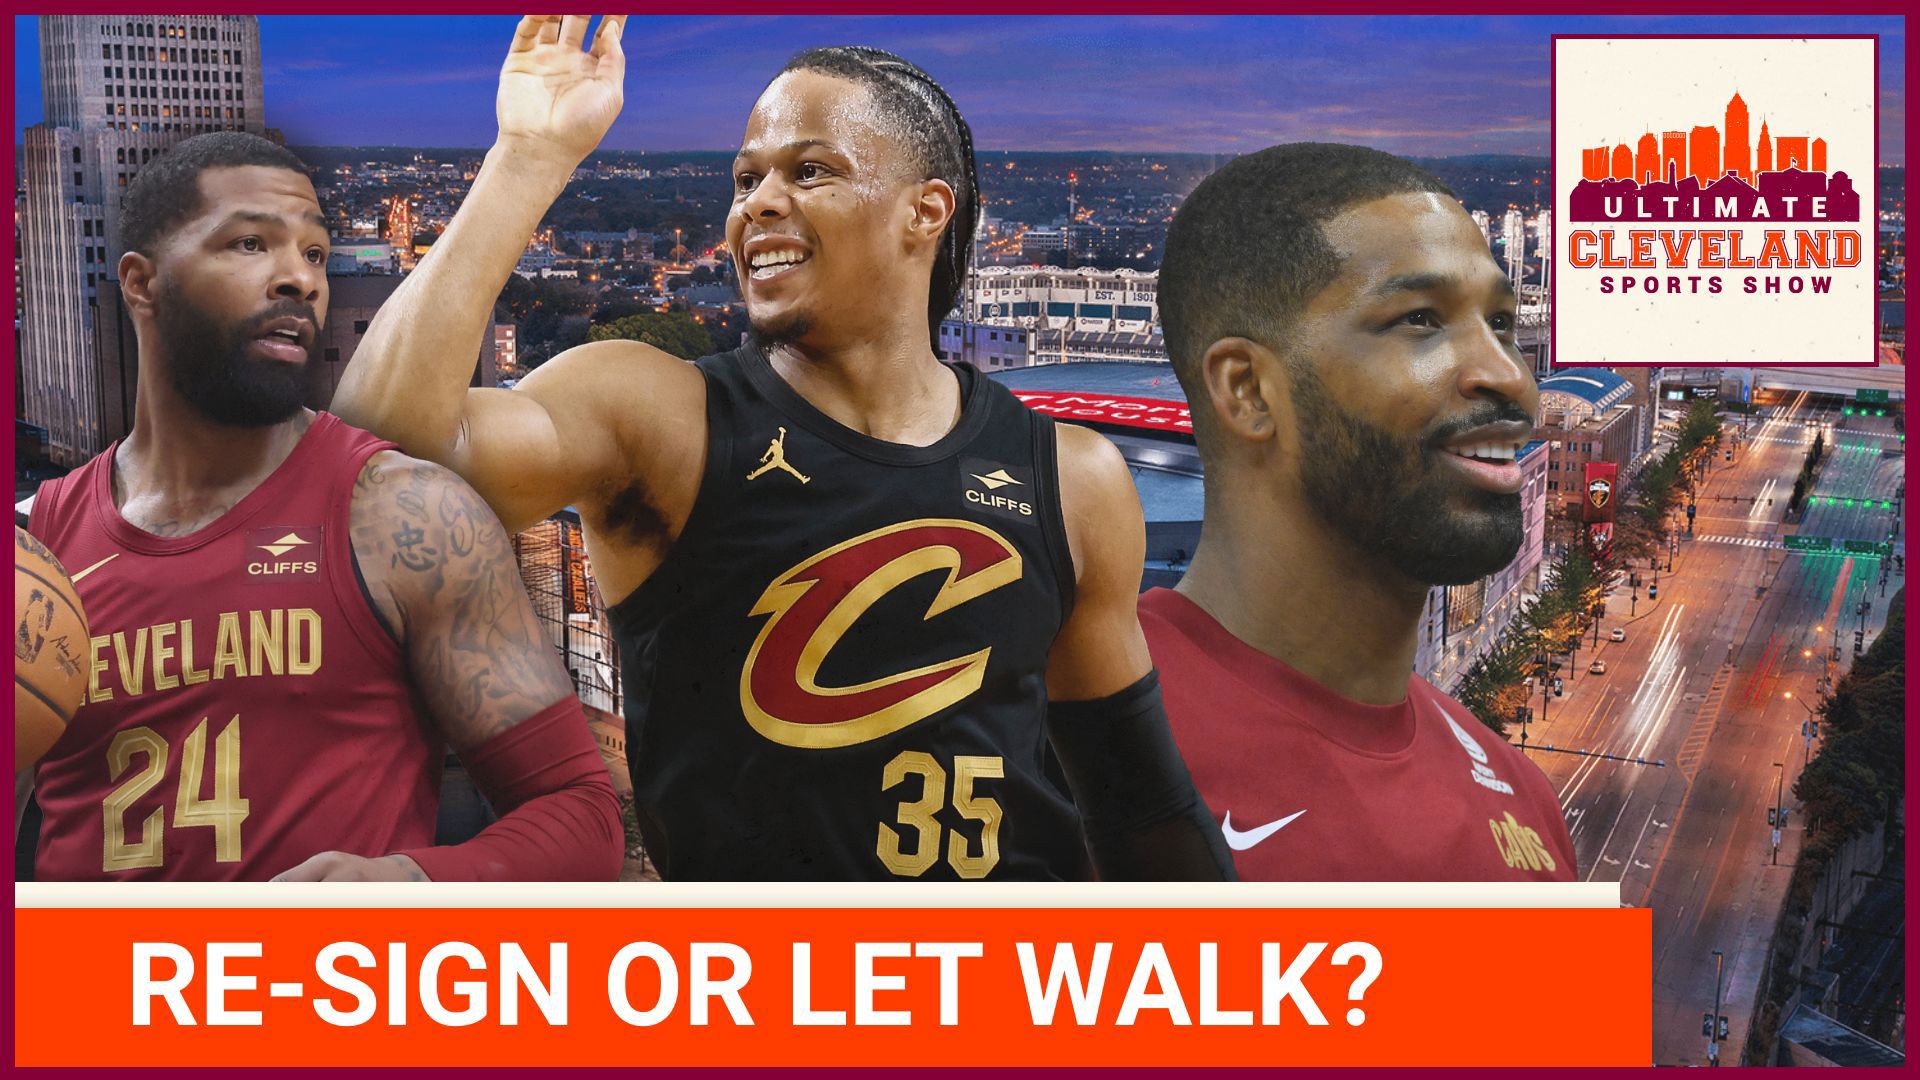 The Cleveland Cavaliers have some difficult decisions upcoming with NBA Free Agency looming in the offseason. Who should Koby Altman be prioritizing?